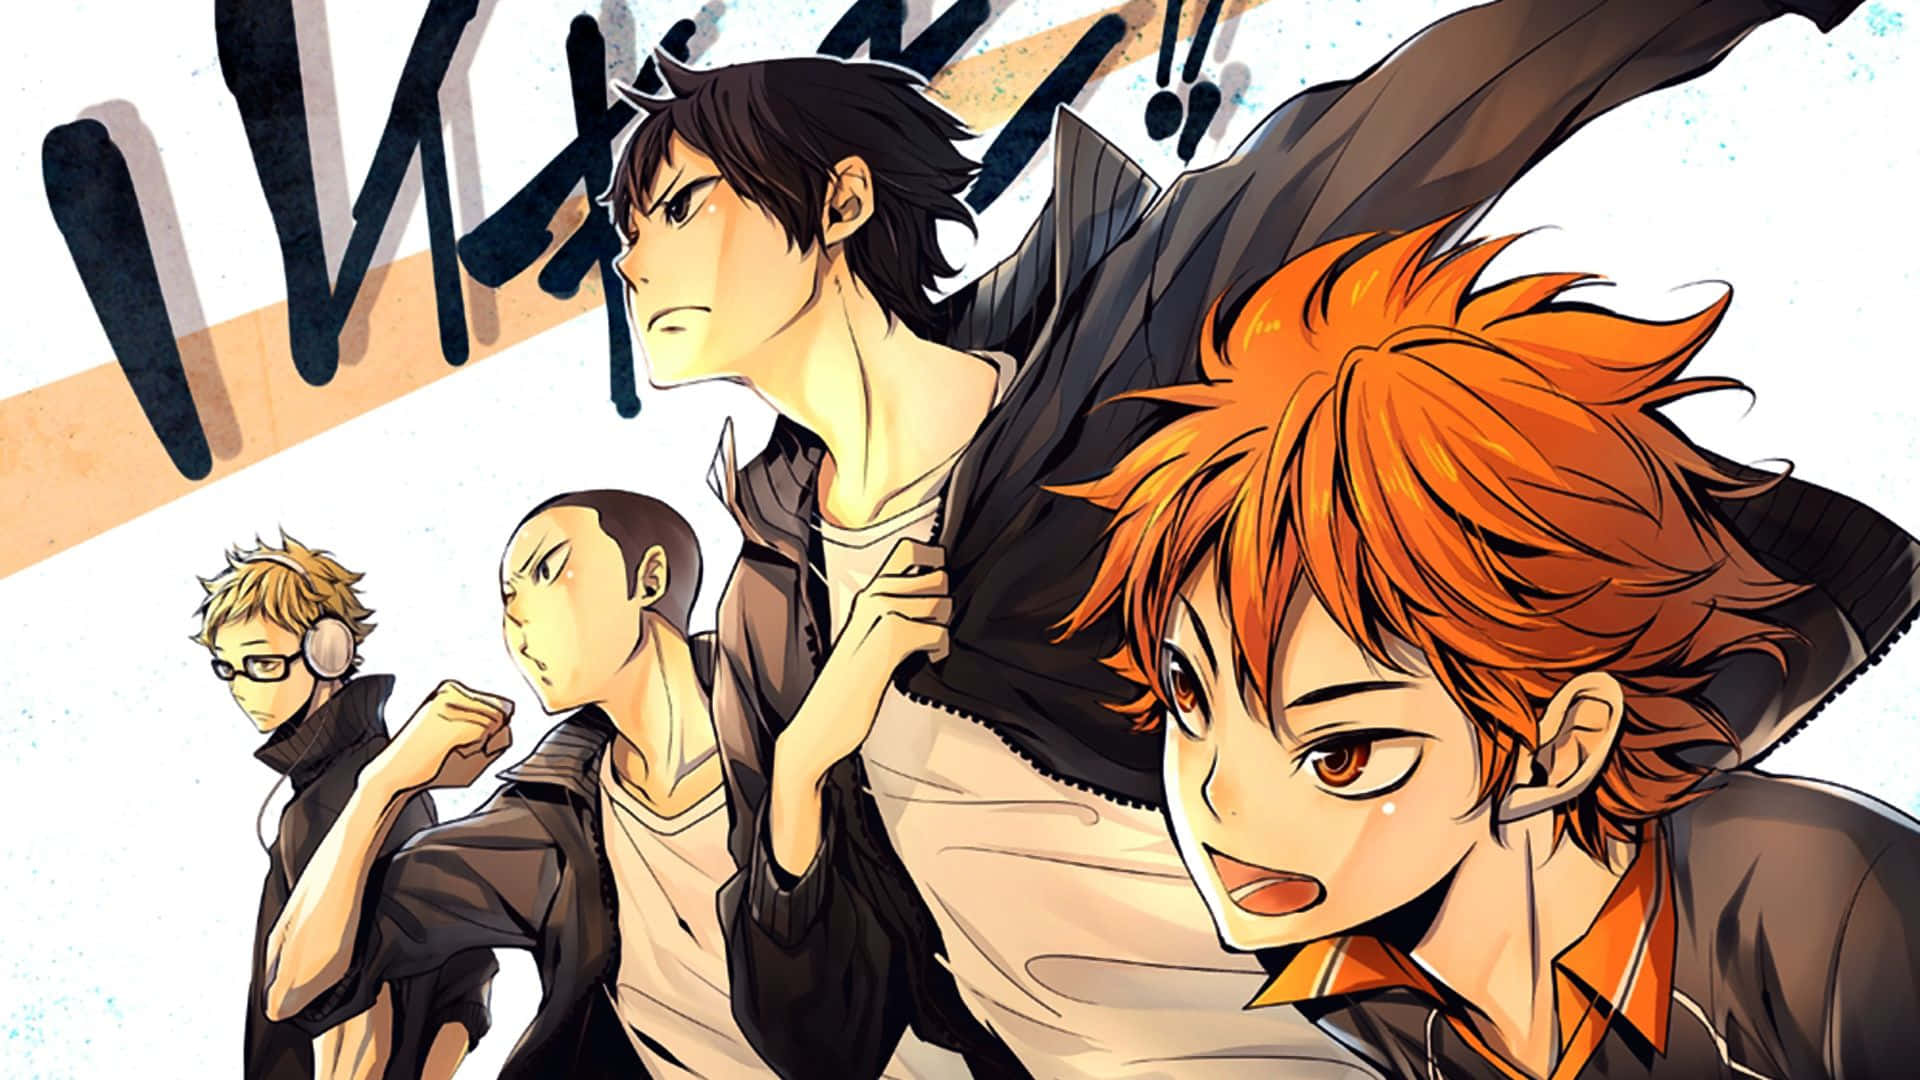 "Reach for your goals with this Haikyuu-themed laptop!" Wallpaper